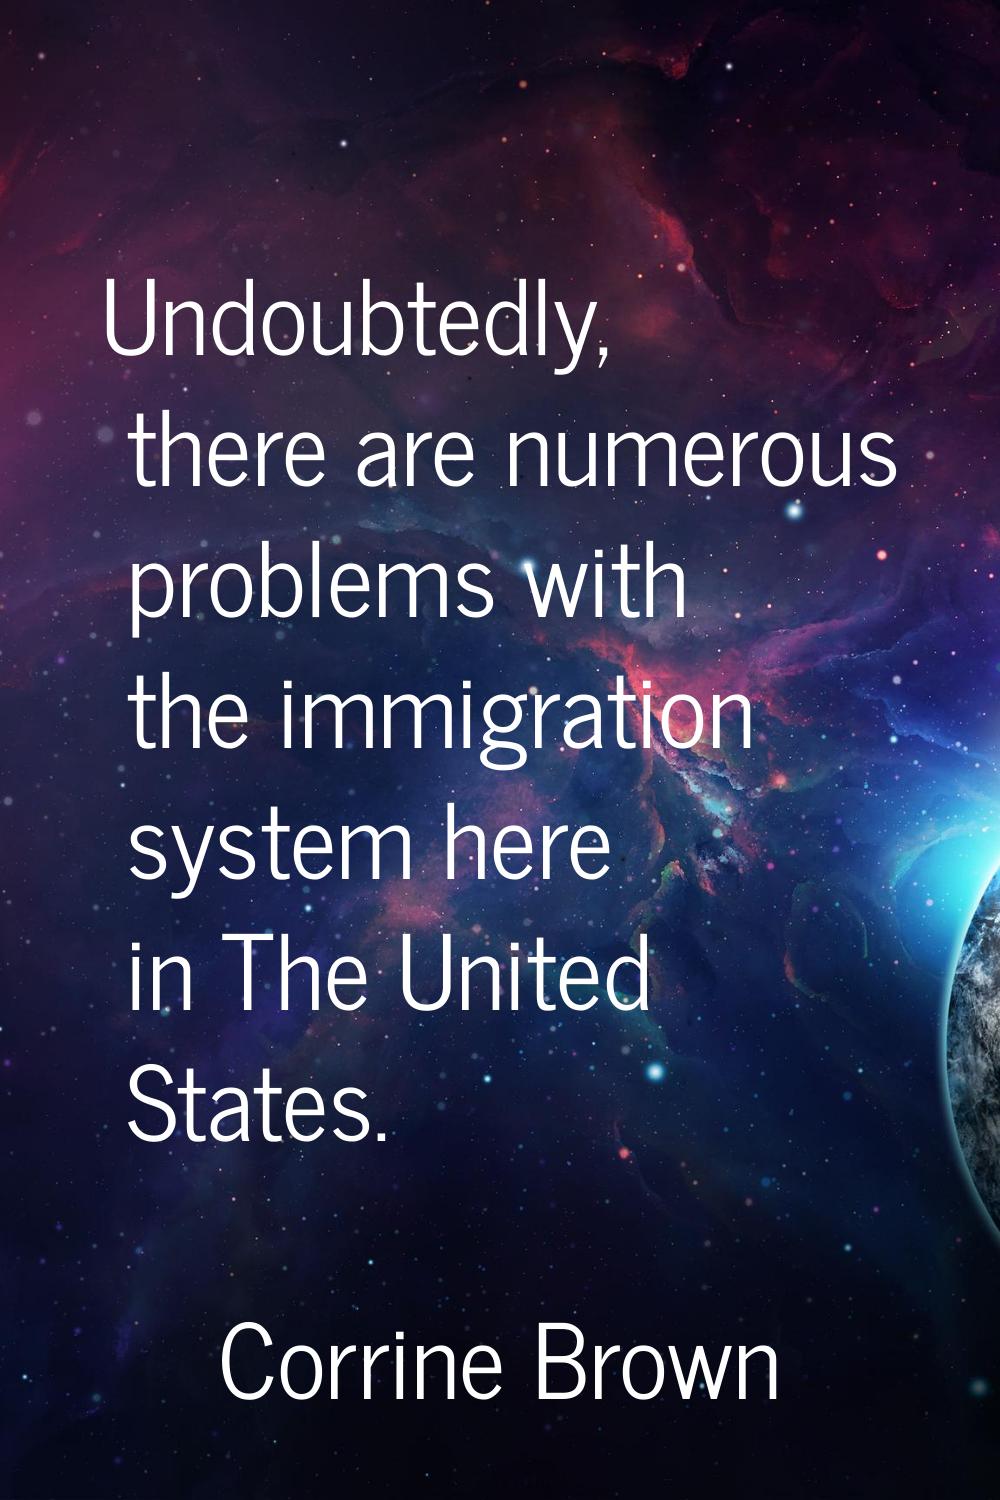 Undoubtedly, there are numerous problems with the immigration system here in The United States.